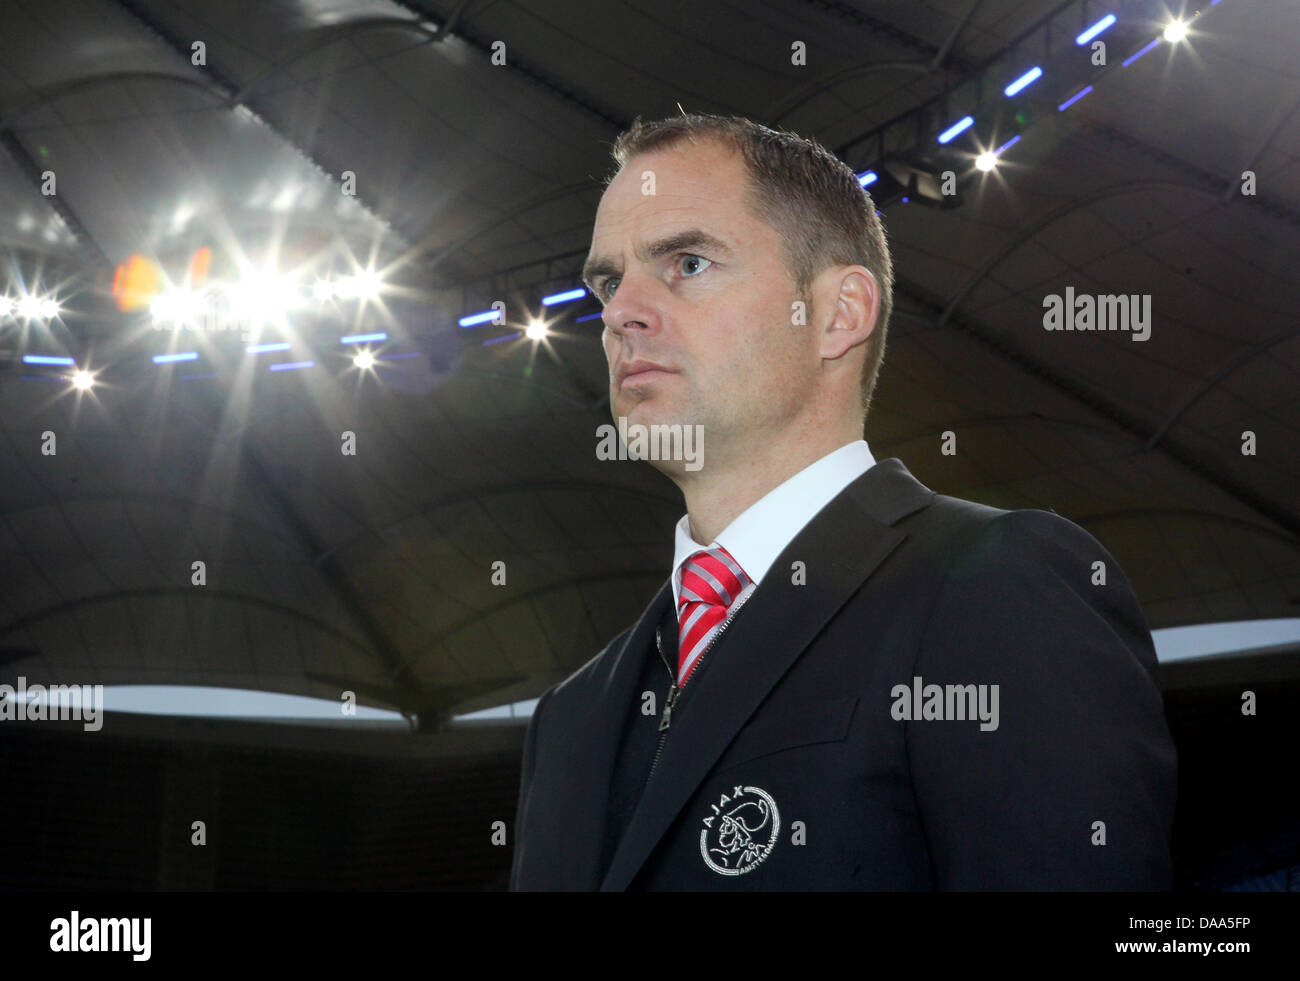 Amsterdam's coach Frank de Boer watches the team warm up during a test match of Hamburger SV versus Ajax Amsterdam in Hamburg, Germany, 8 January 2011. Photo: Malte Christians Stock Photo